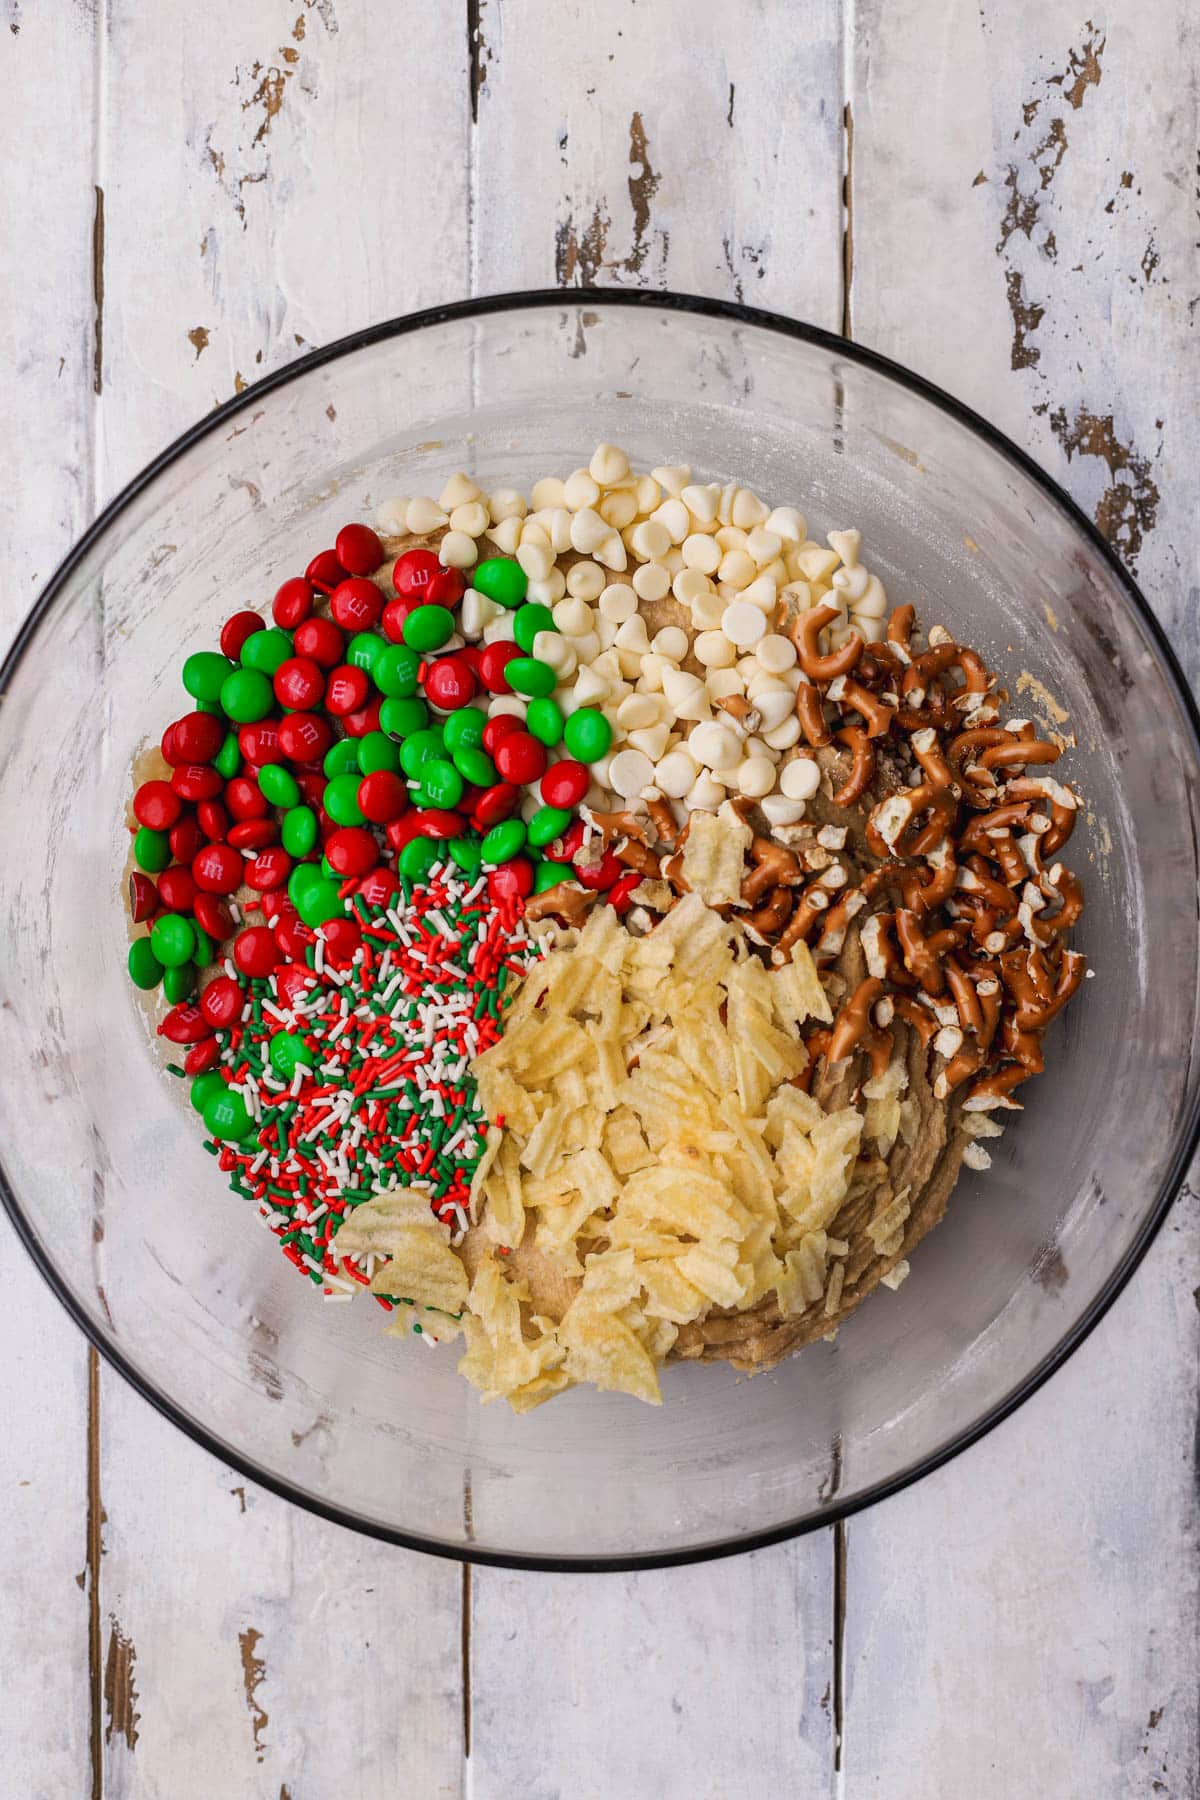 Cookie dough with M&M's, white chocolate chips, pretzels, potato chips and Christmas jimmies. 